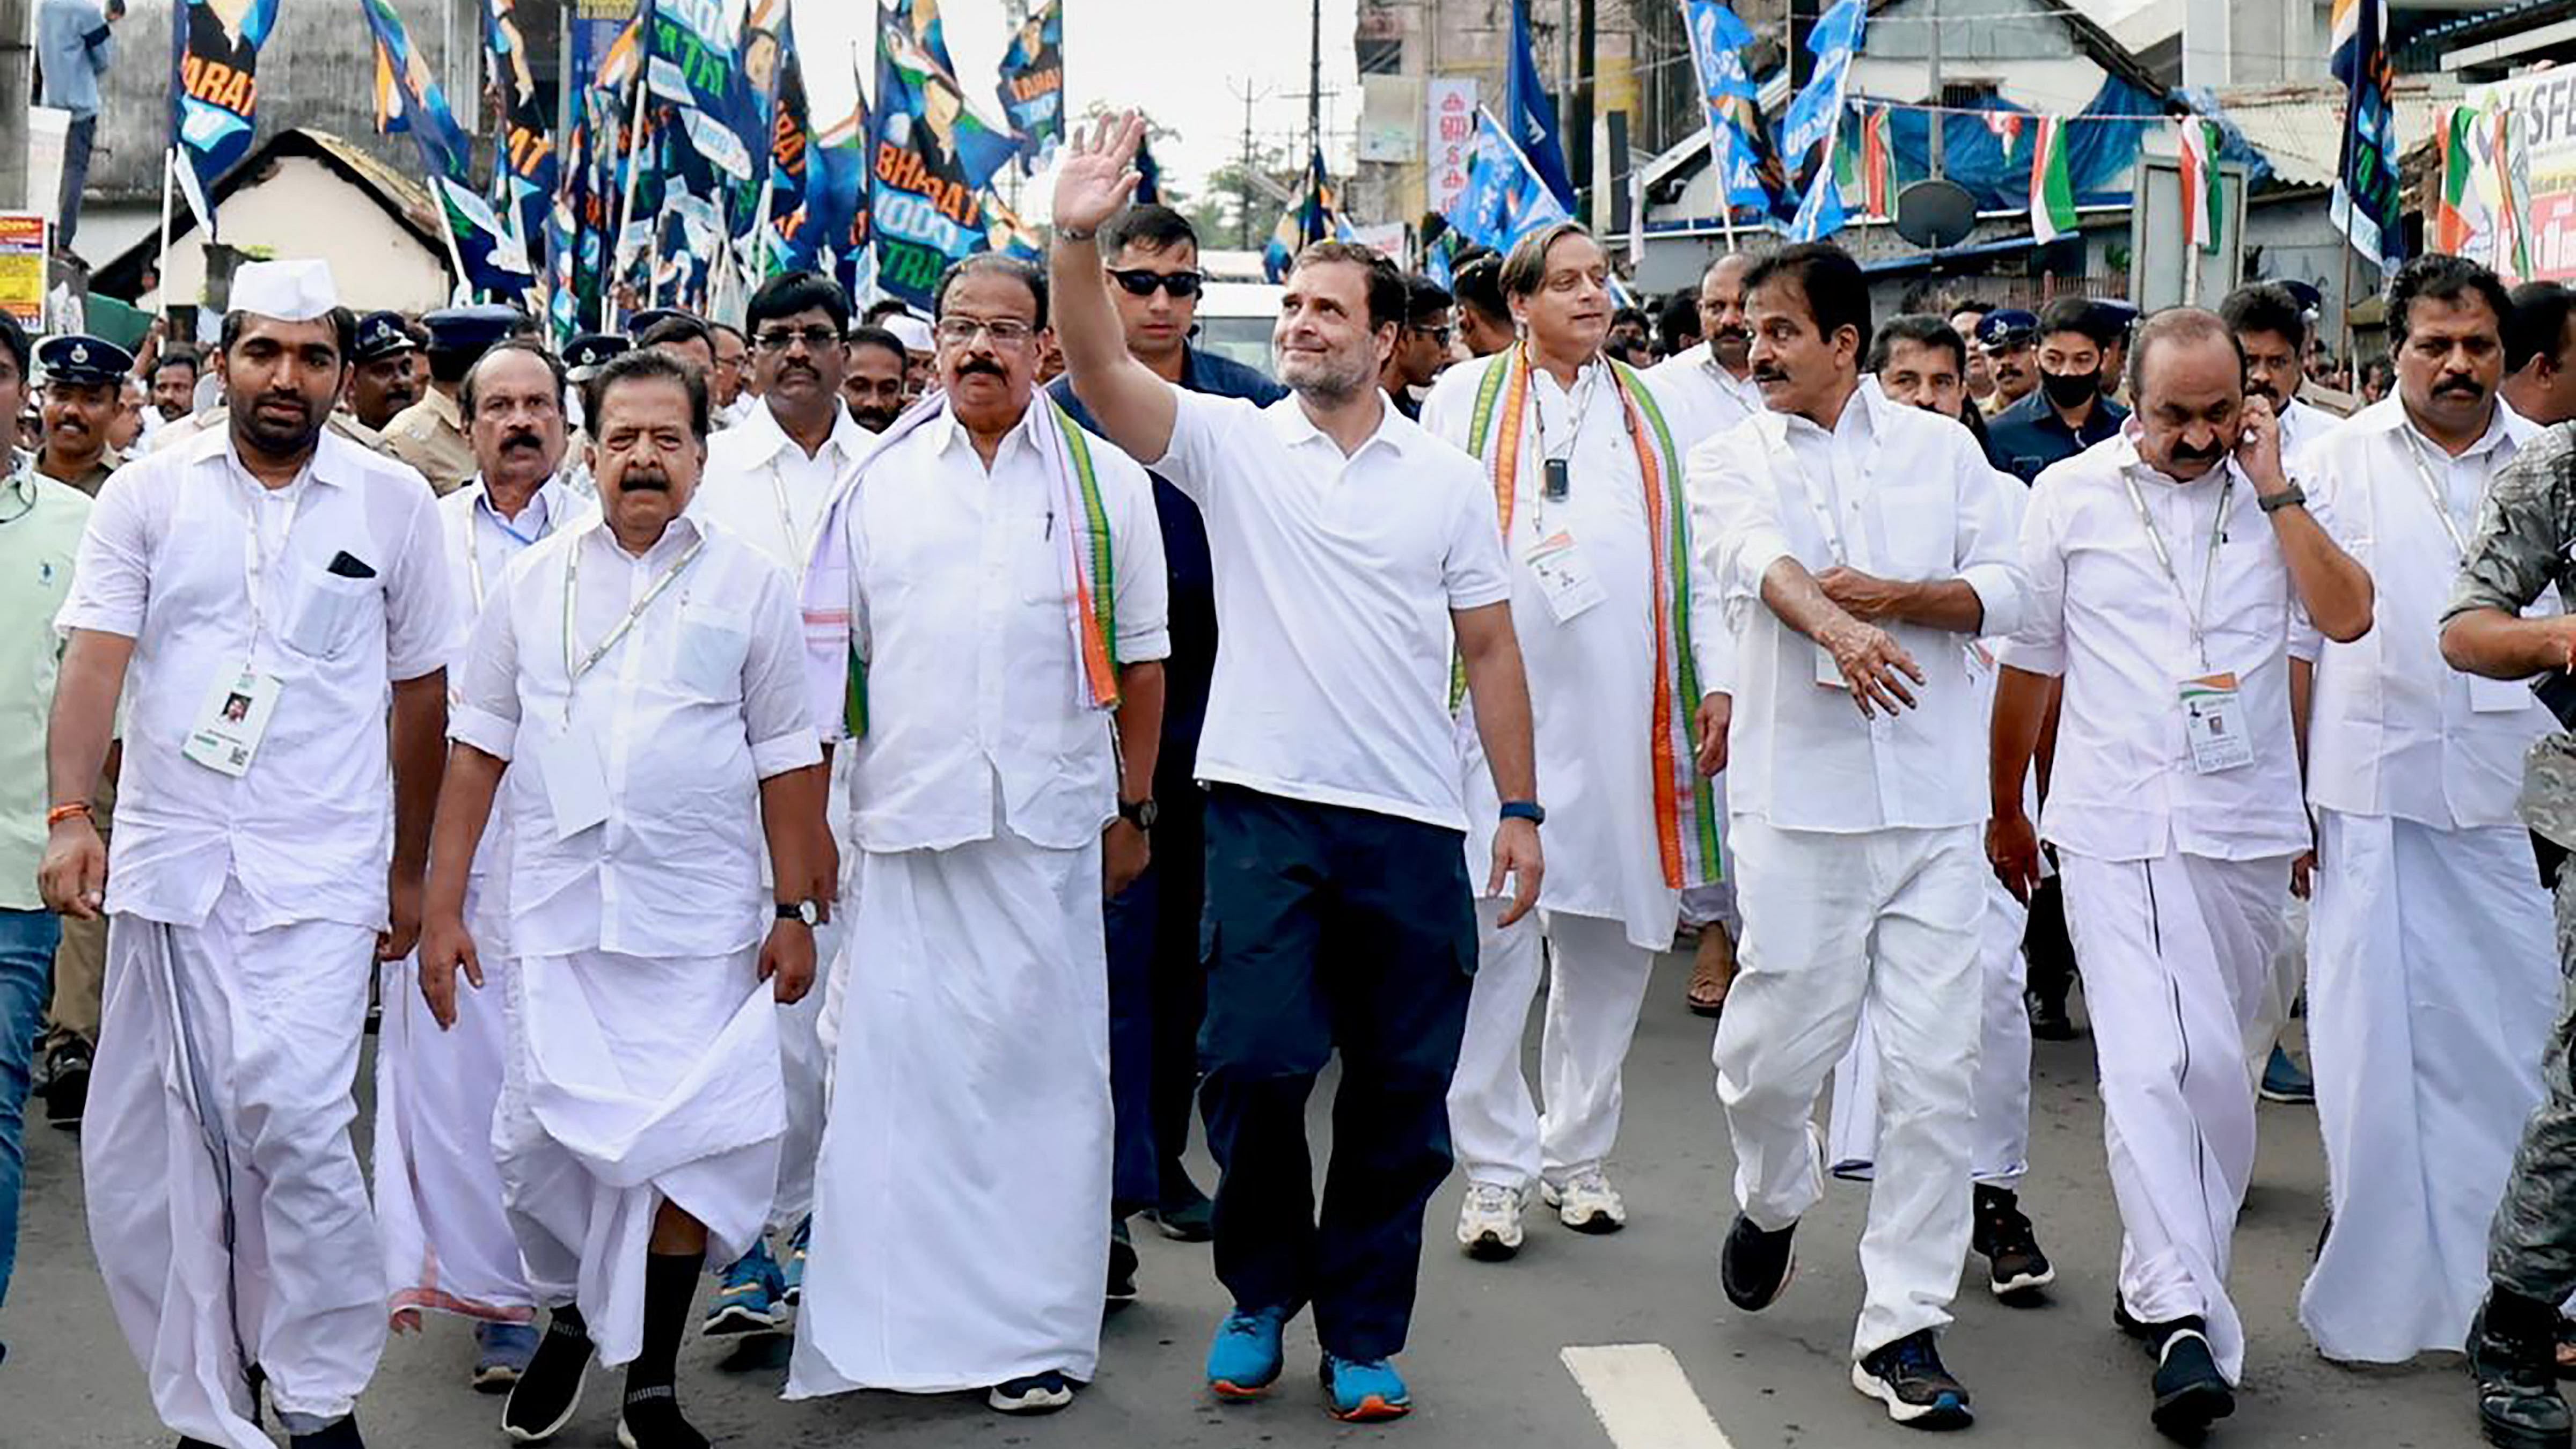 Congress leader Rahul Gandhi with party leaders waves at supporters during the 'Bharat Jodo Yatra' at Parassala, Thiruvananthapuram. Credit: PTI Photo